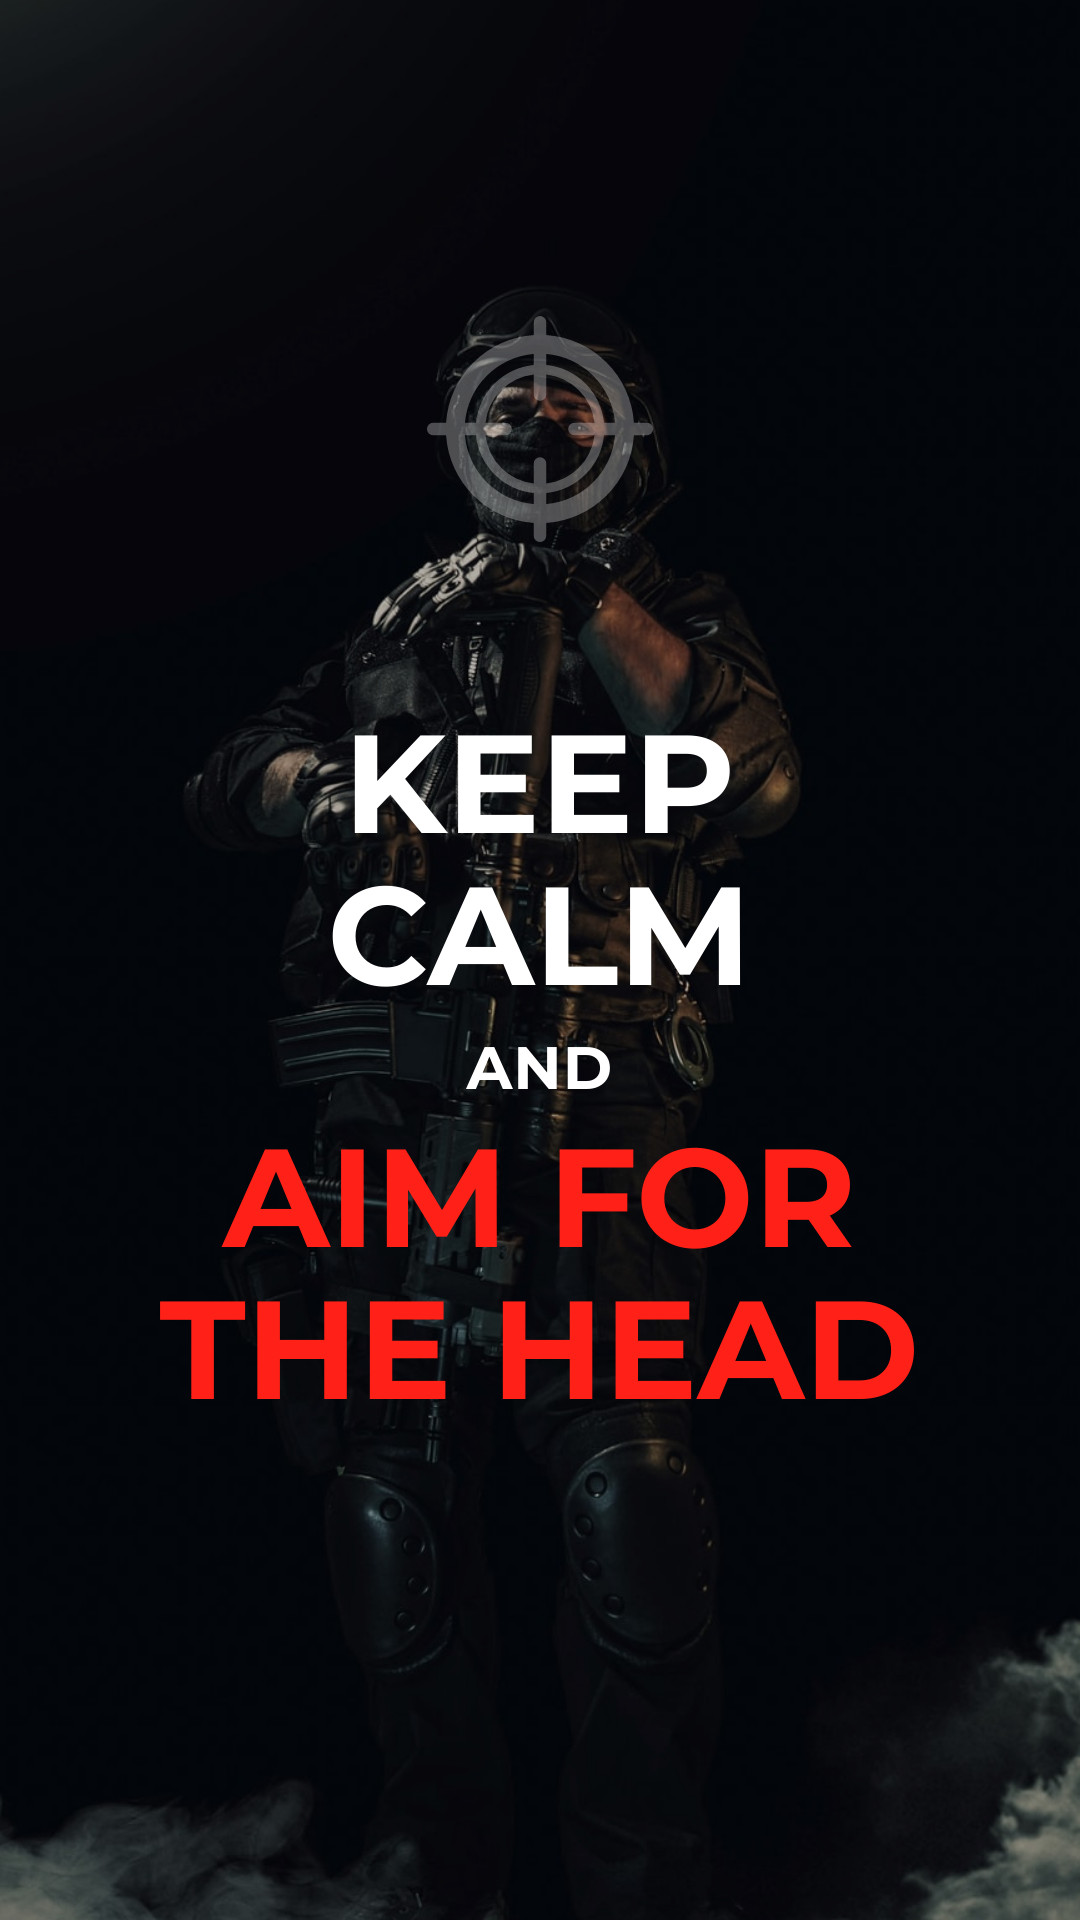 Keep Calm and Aim for the Head Facebook Sponsored Message 1200x628